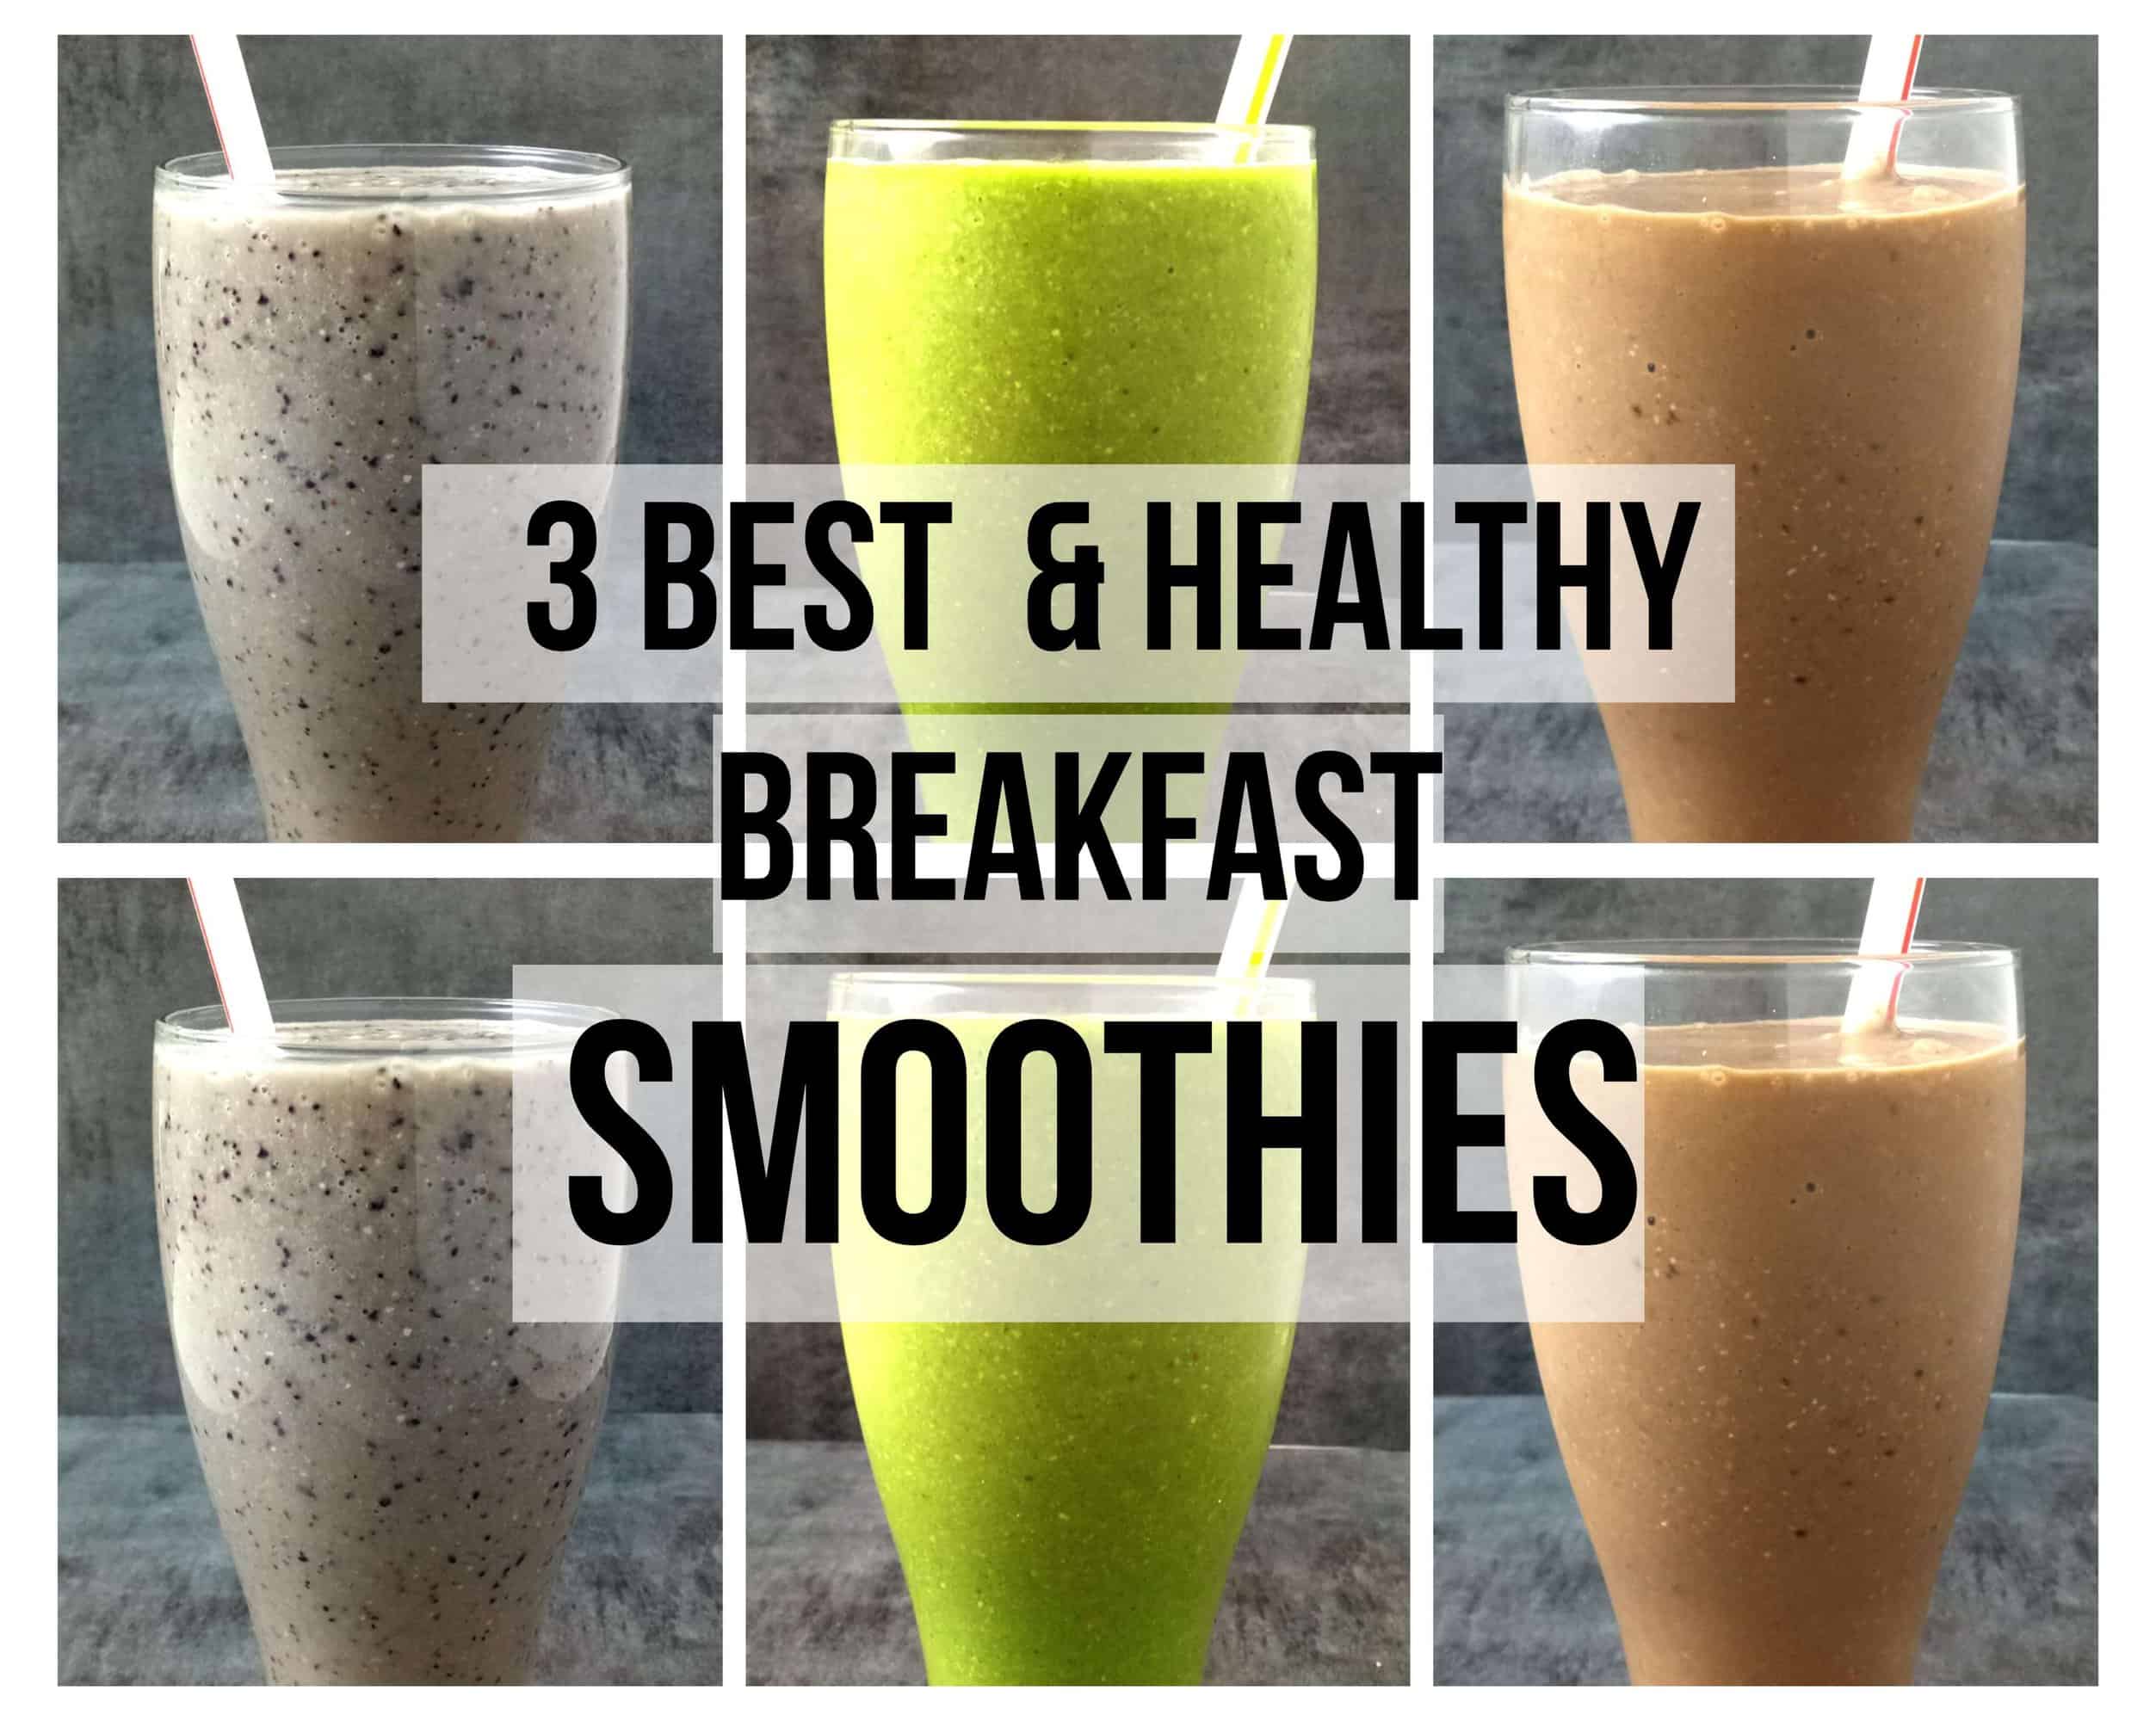 HEALTHY BREAKFAST SMOOTHIES   SMOOTHIES FOR WEIGHT LOSS   SMOOTHIE IDEAS    VEGAN SMOOTHIES